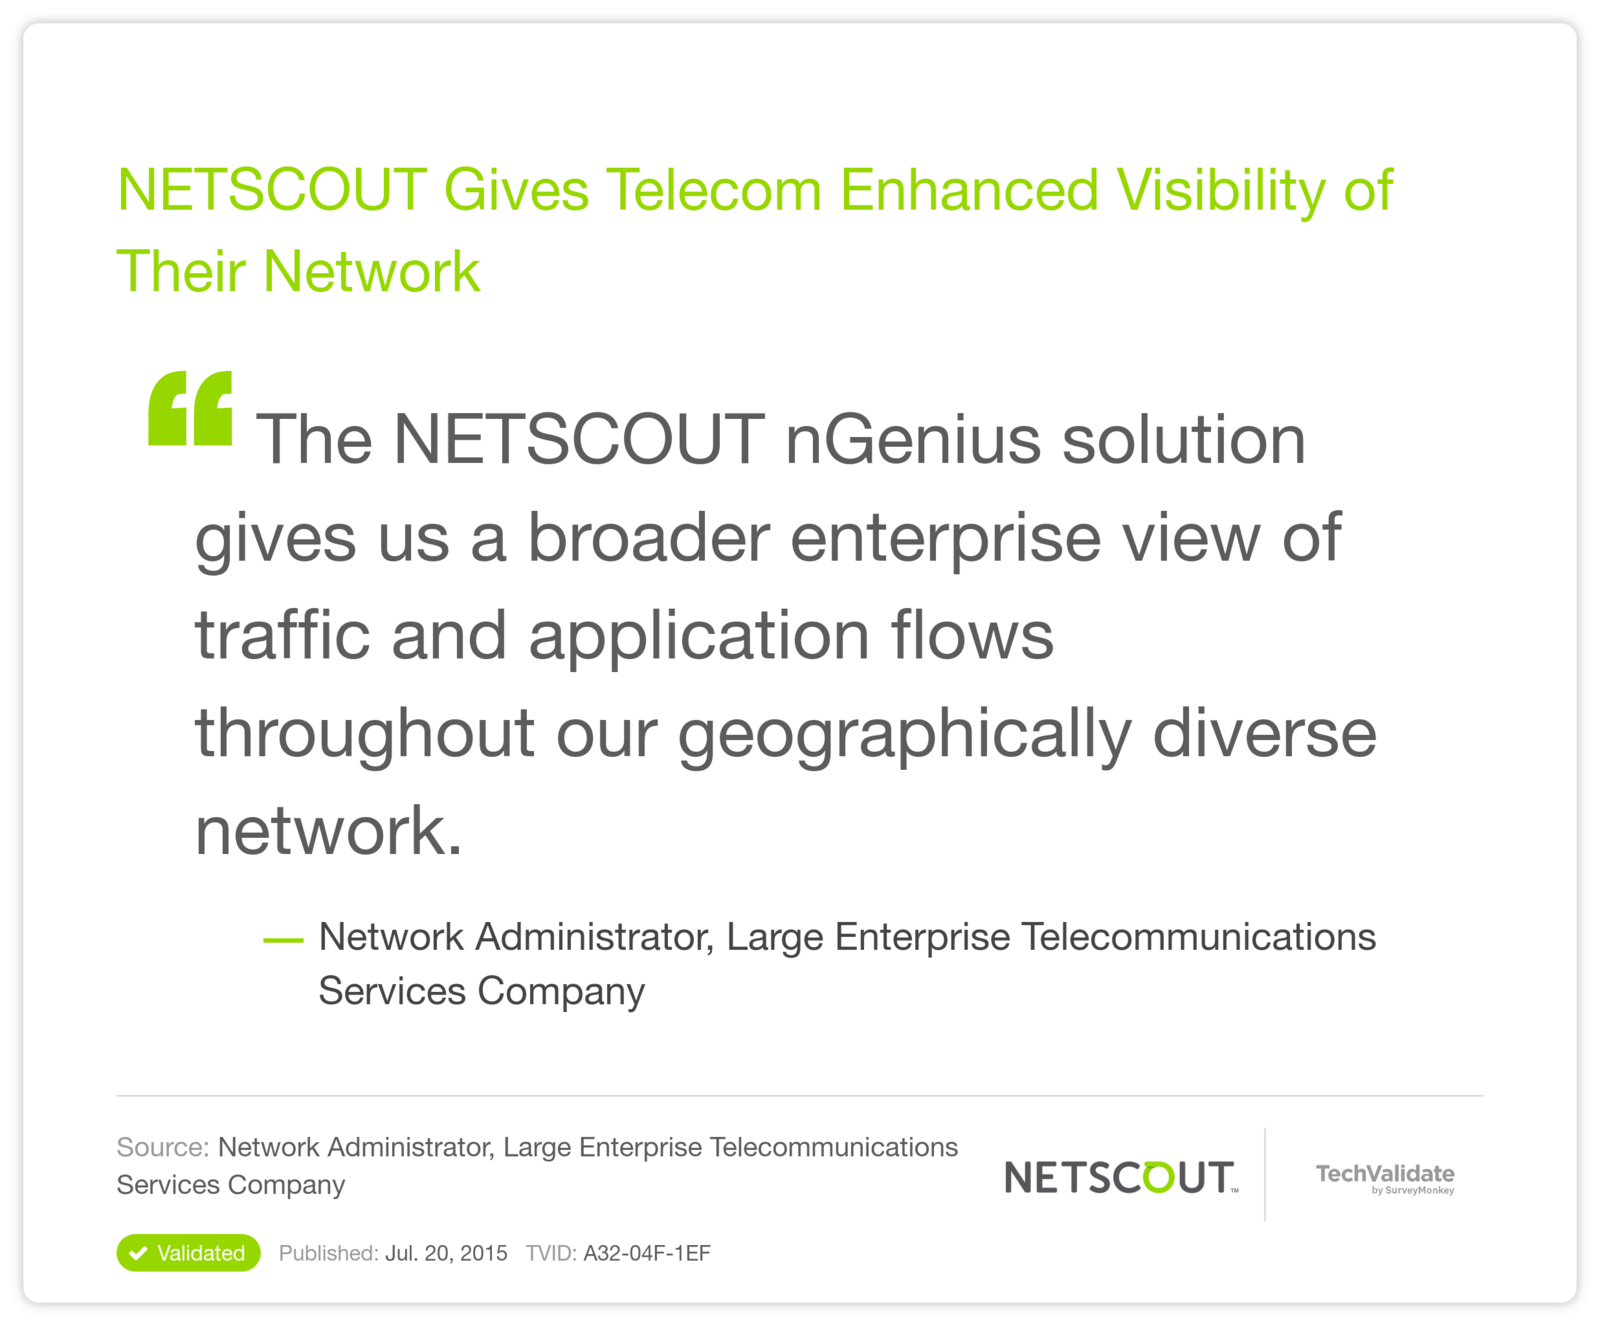 NETSCOUT Gives Telecom Enhanced Visibility of Their Network